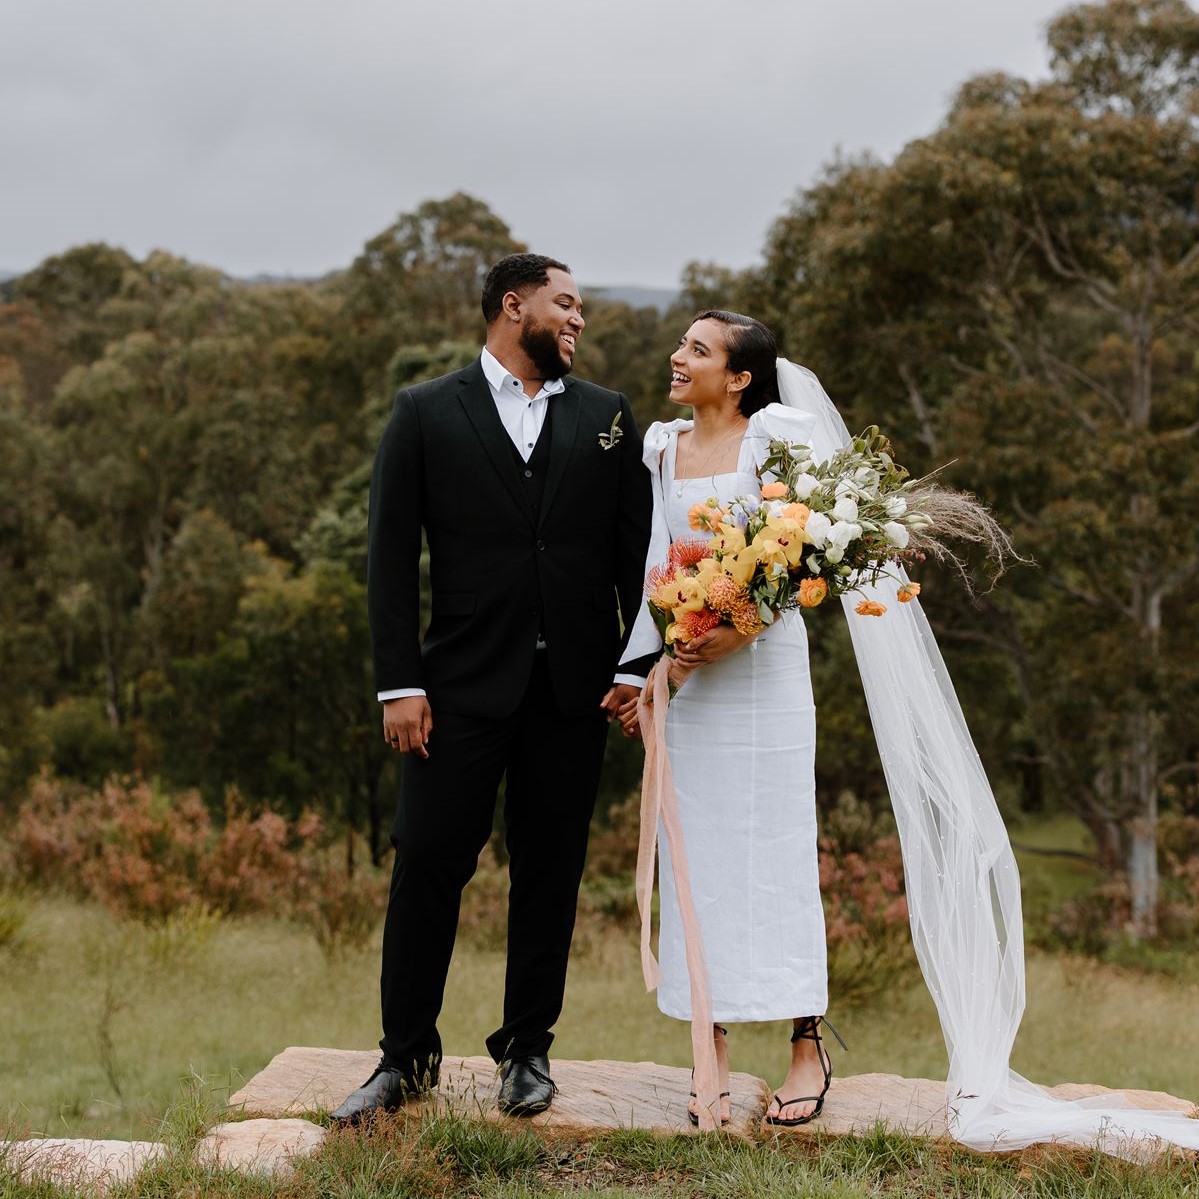 How much does a wedding photographer cost in Sydney?